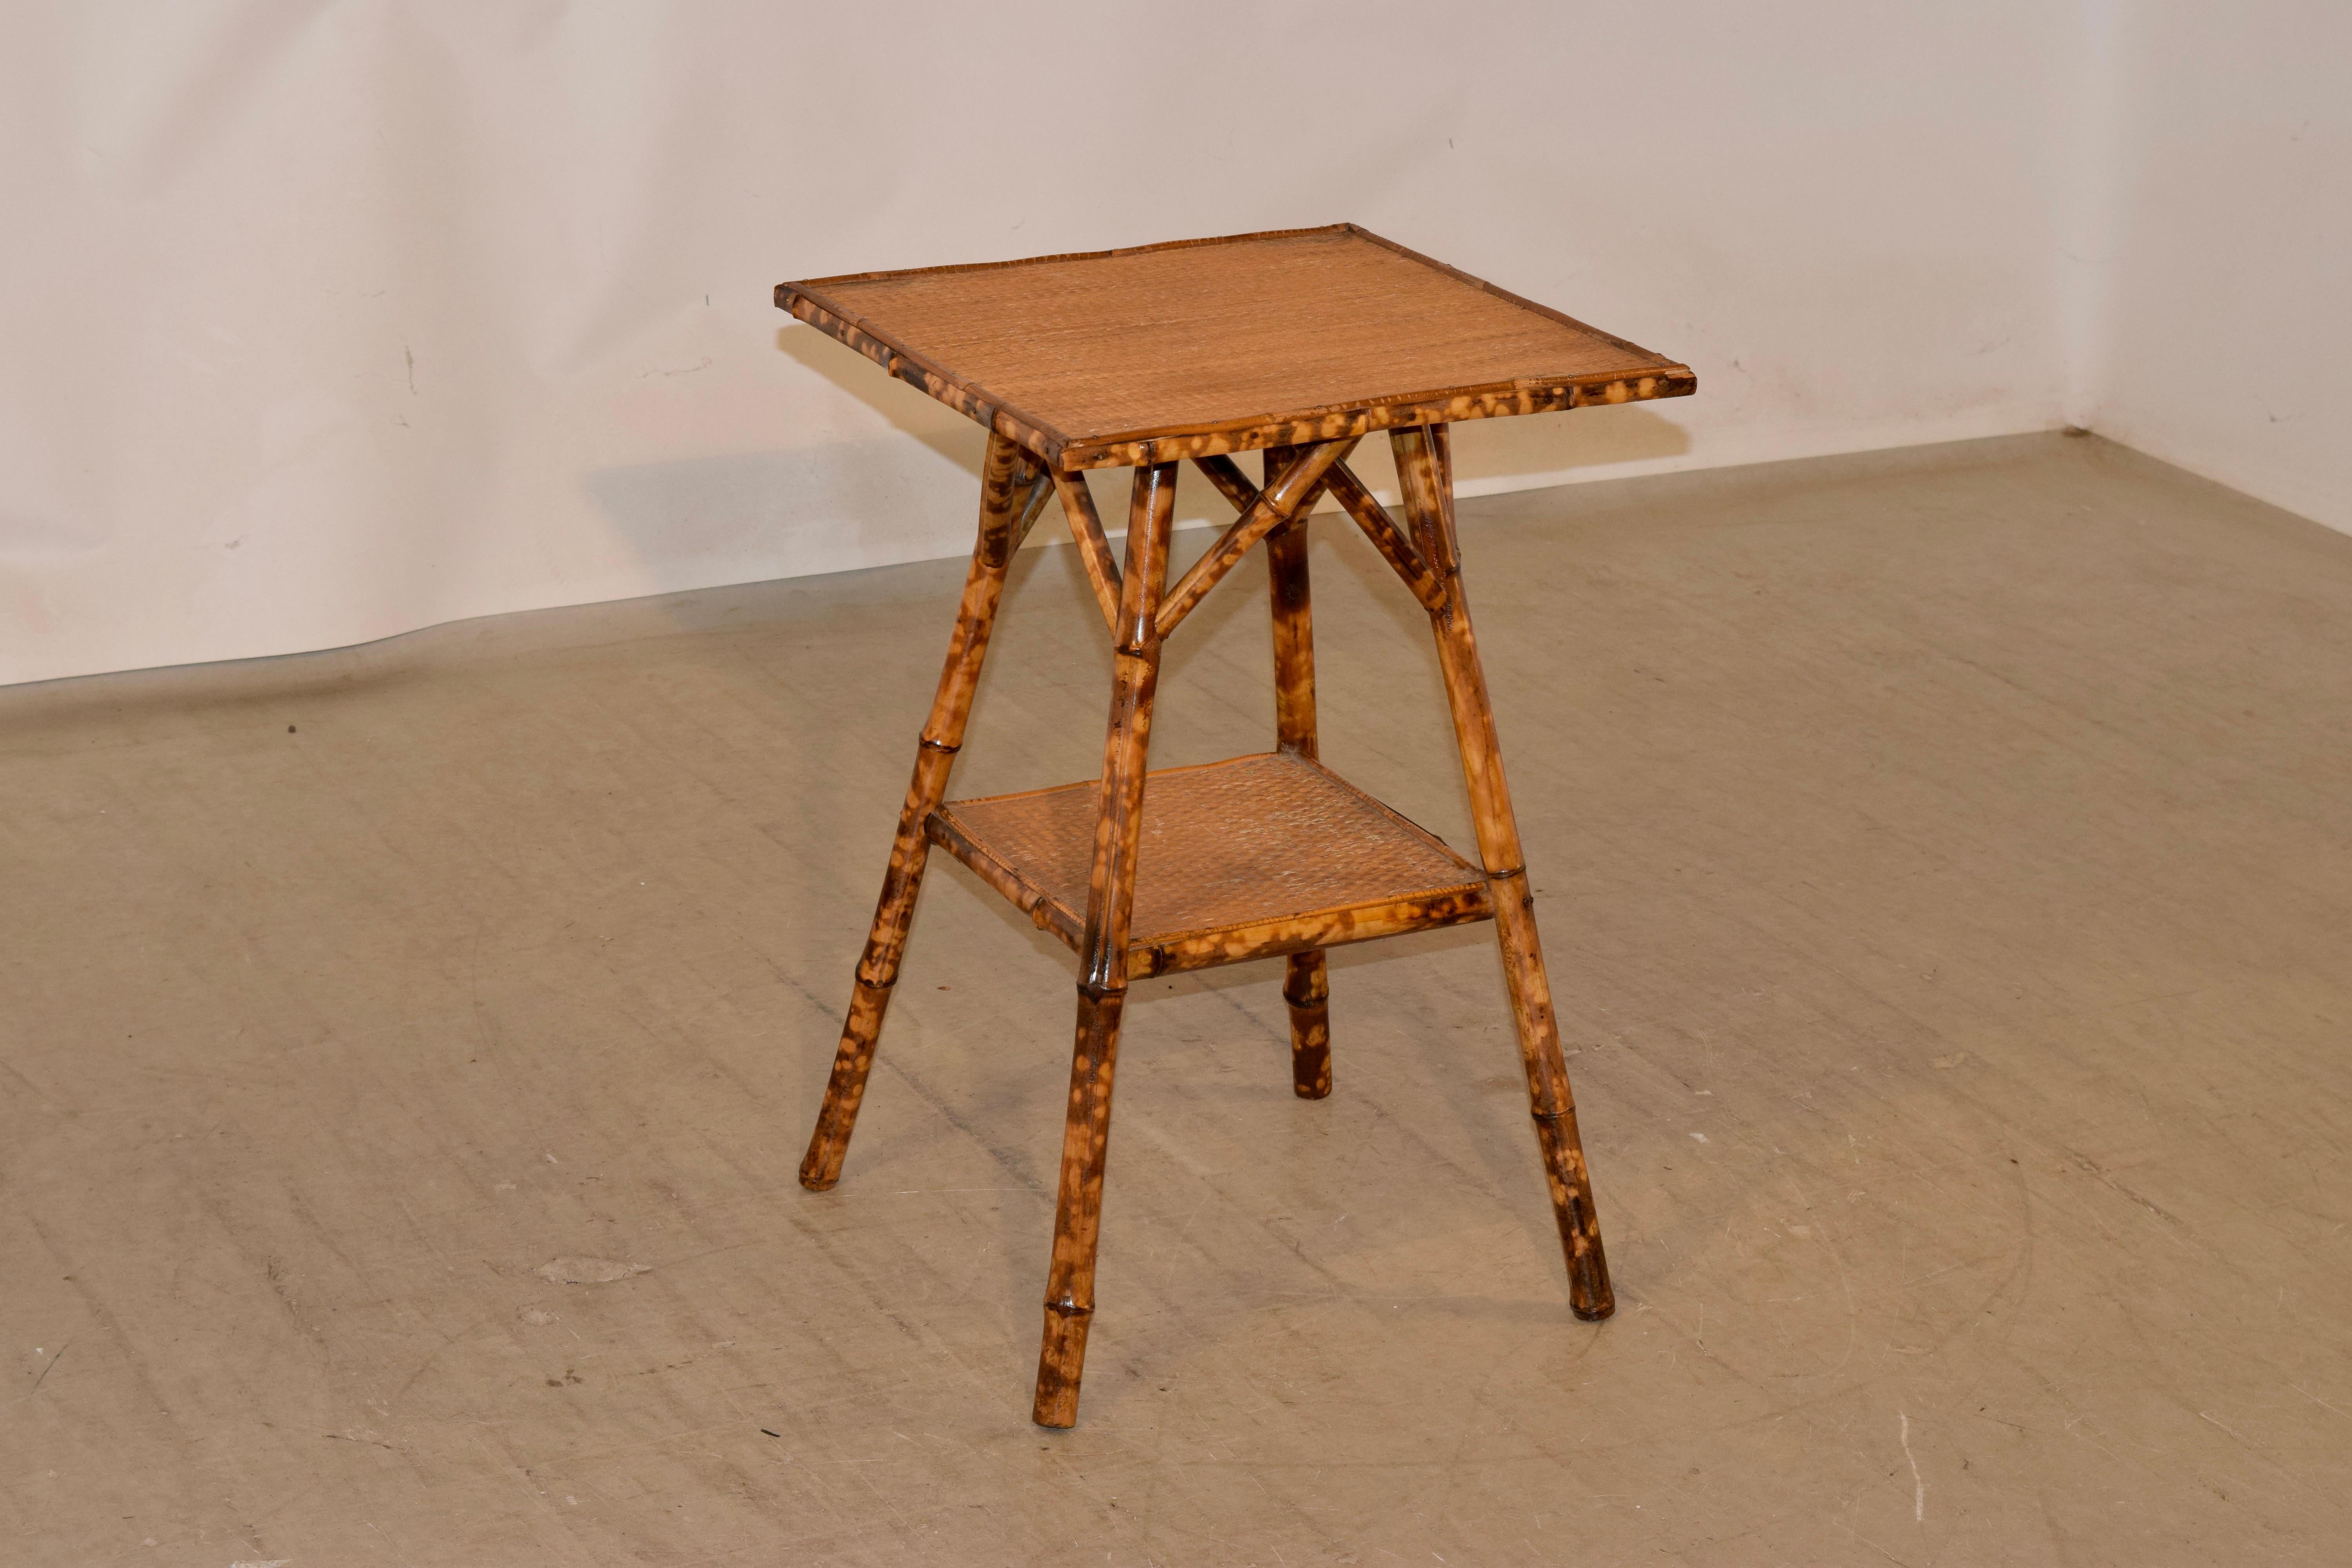 19th century tortoise bamboo table from France with a rush covered top and slightly splayed legs, joined by a lower shelf, which is also covered in rush.